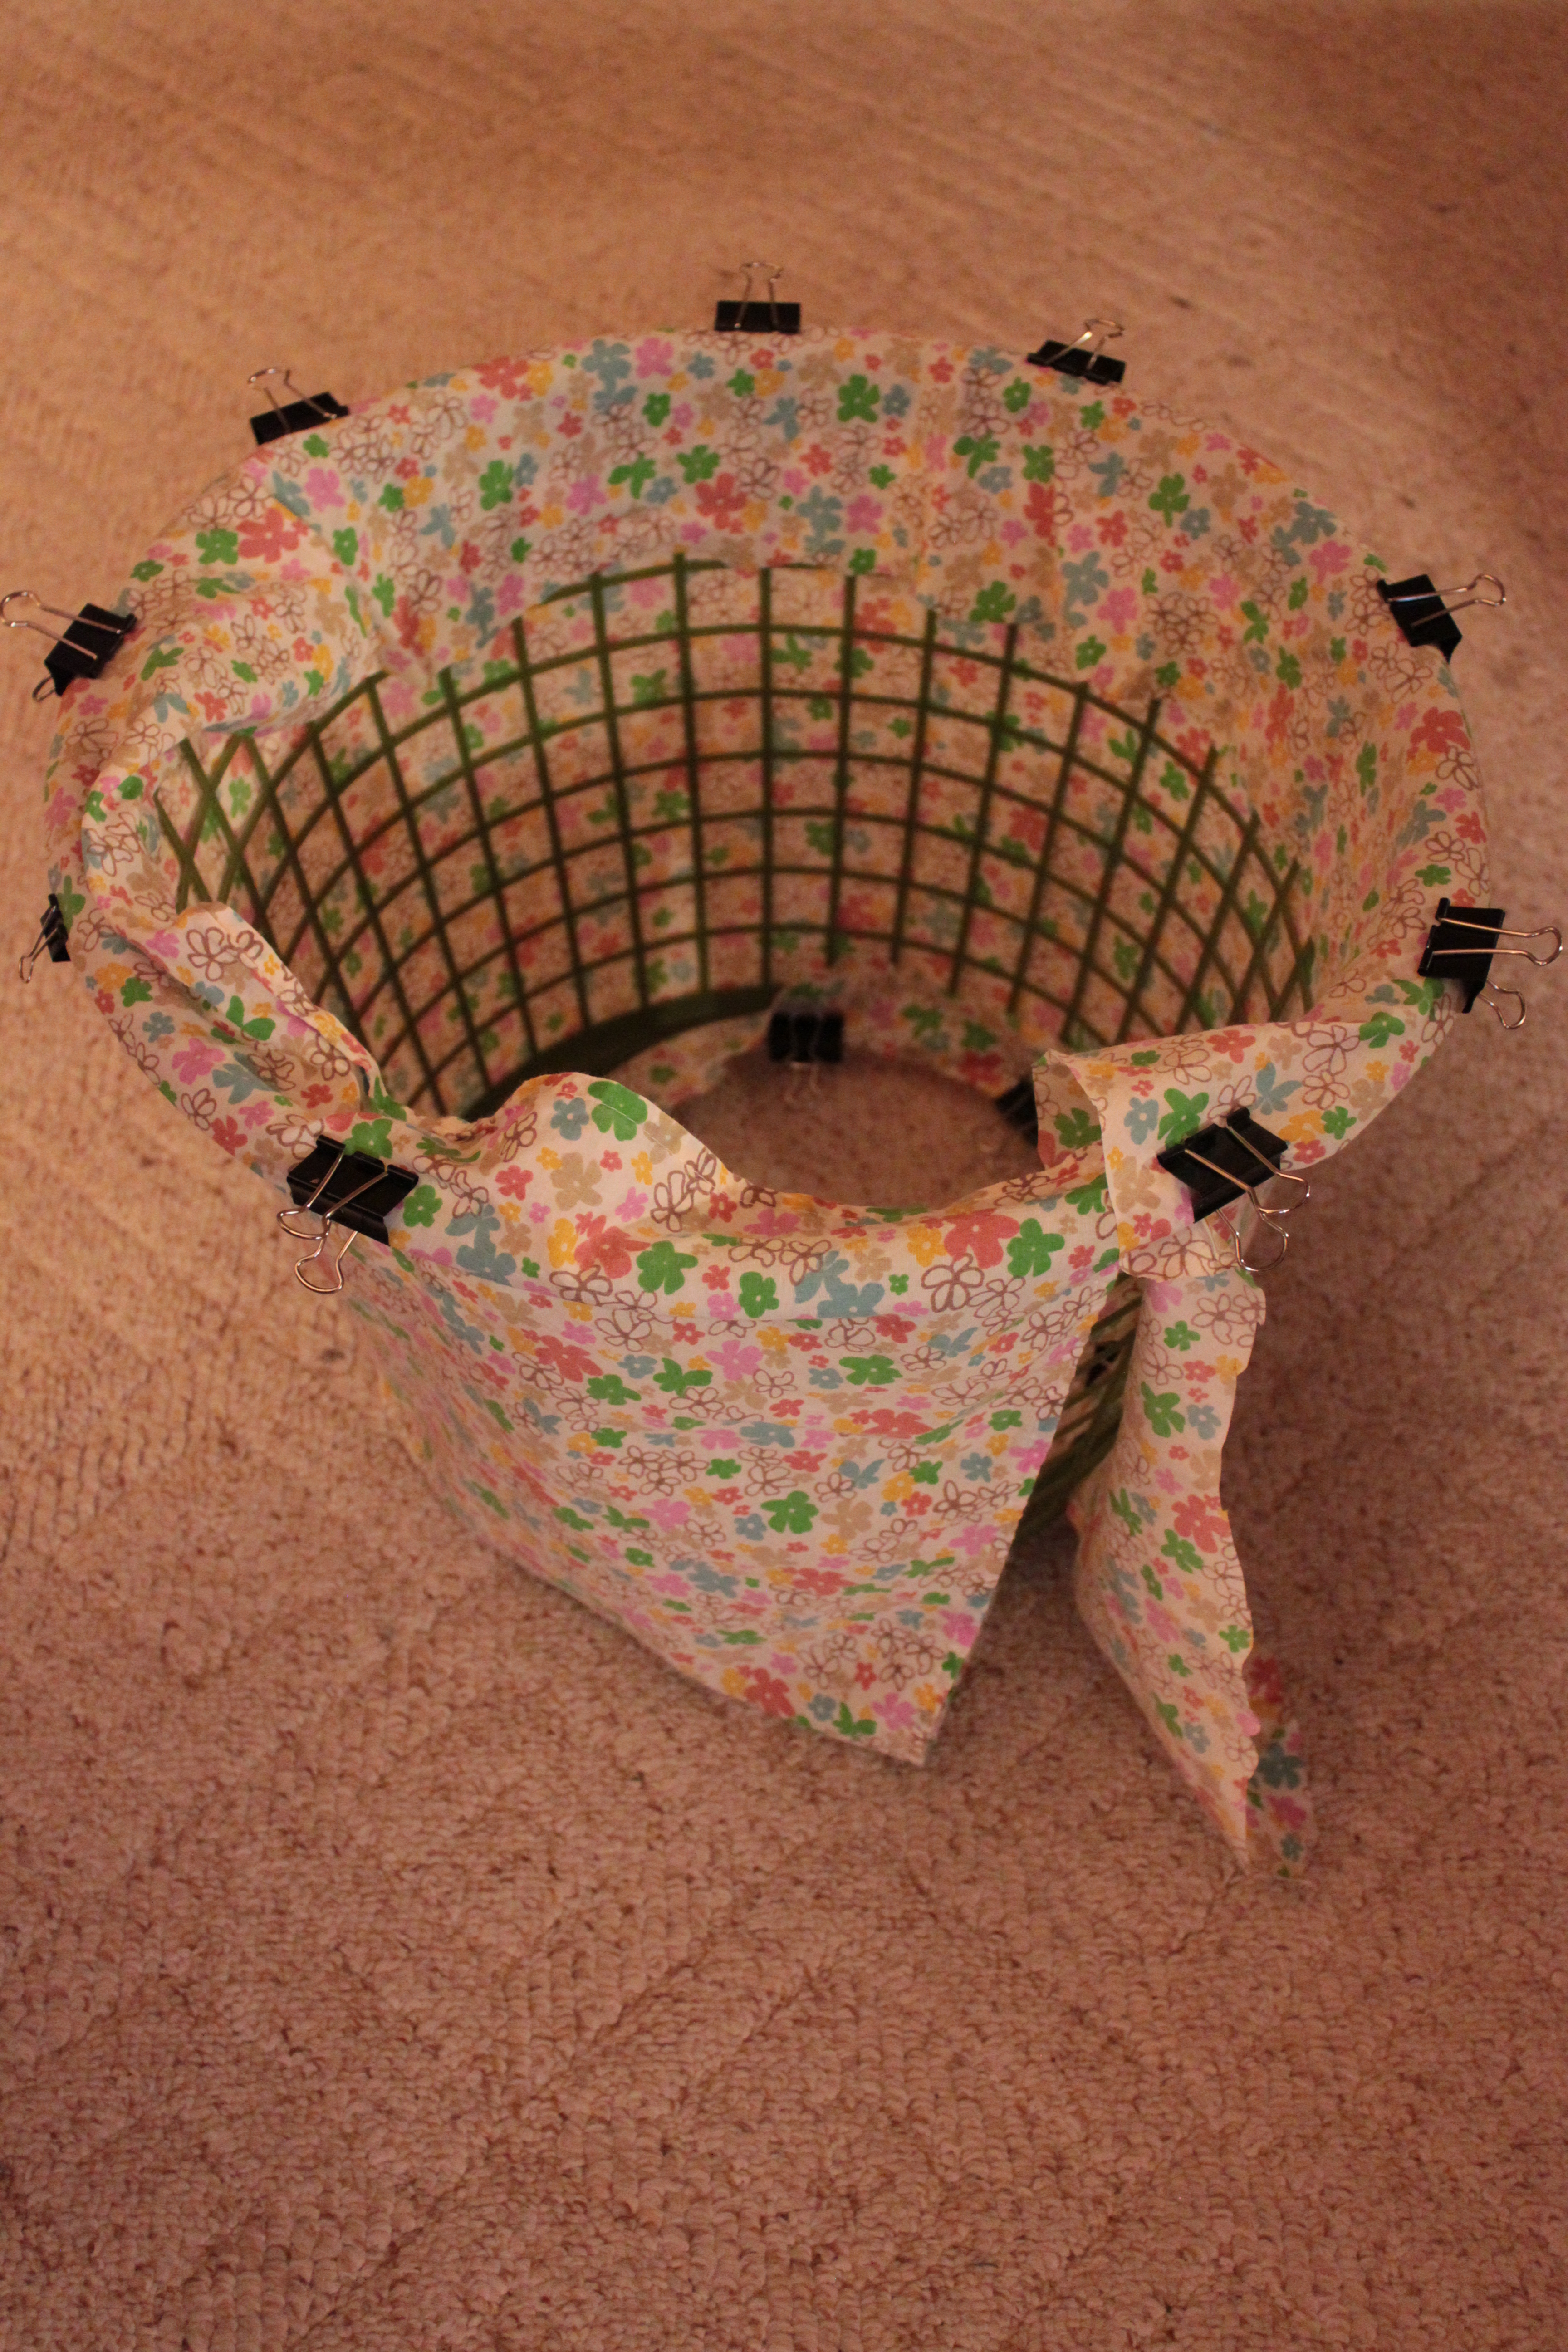 Closer view of cupcake basket in process.